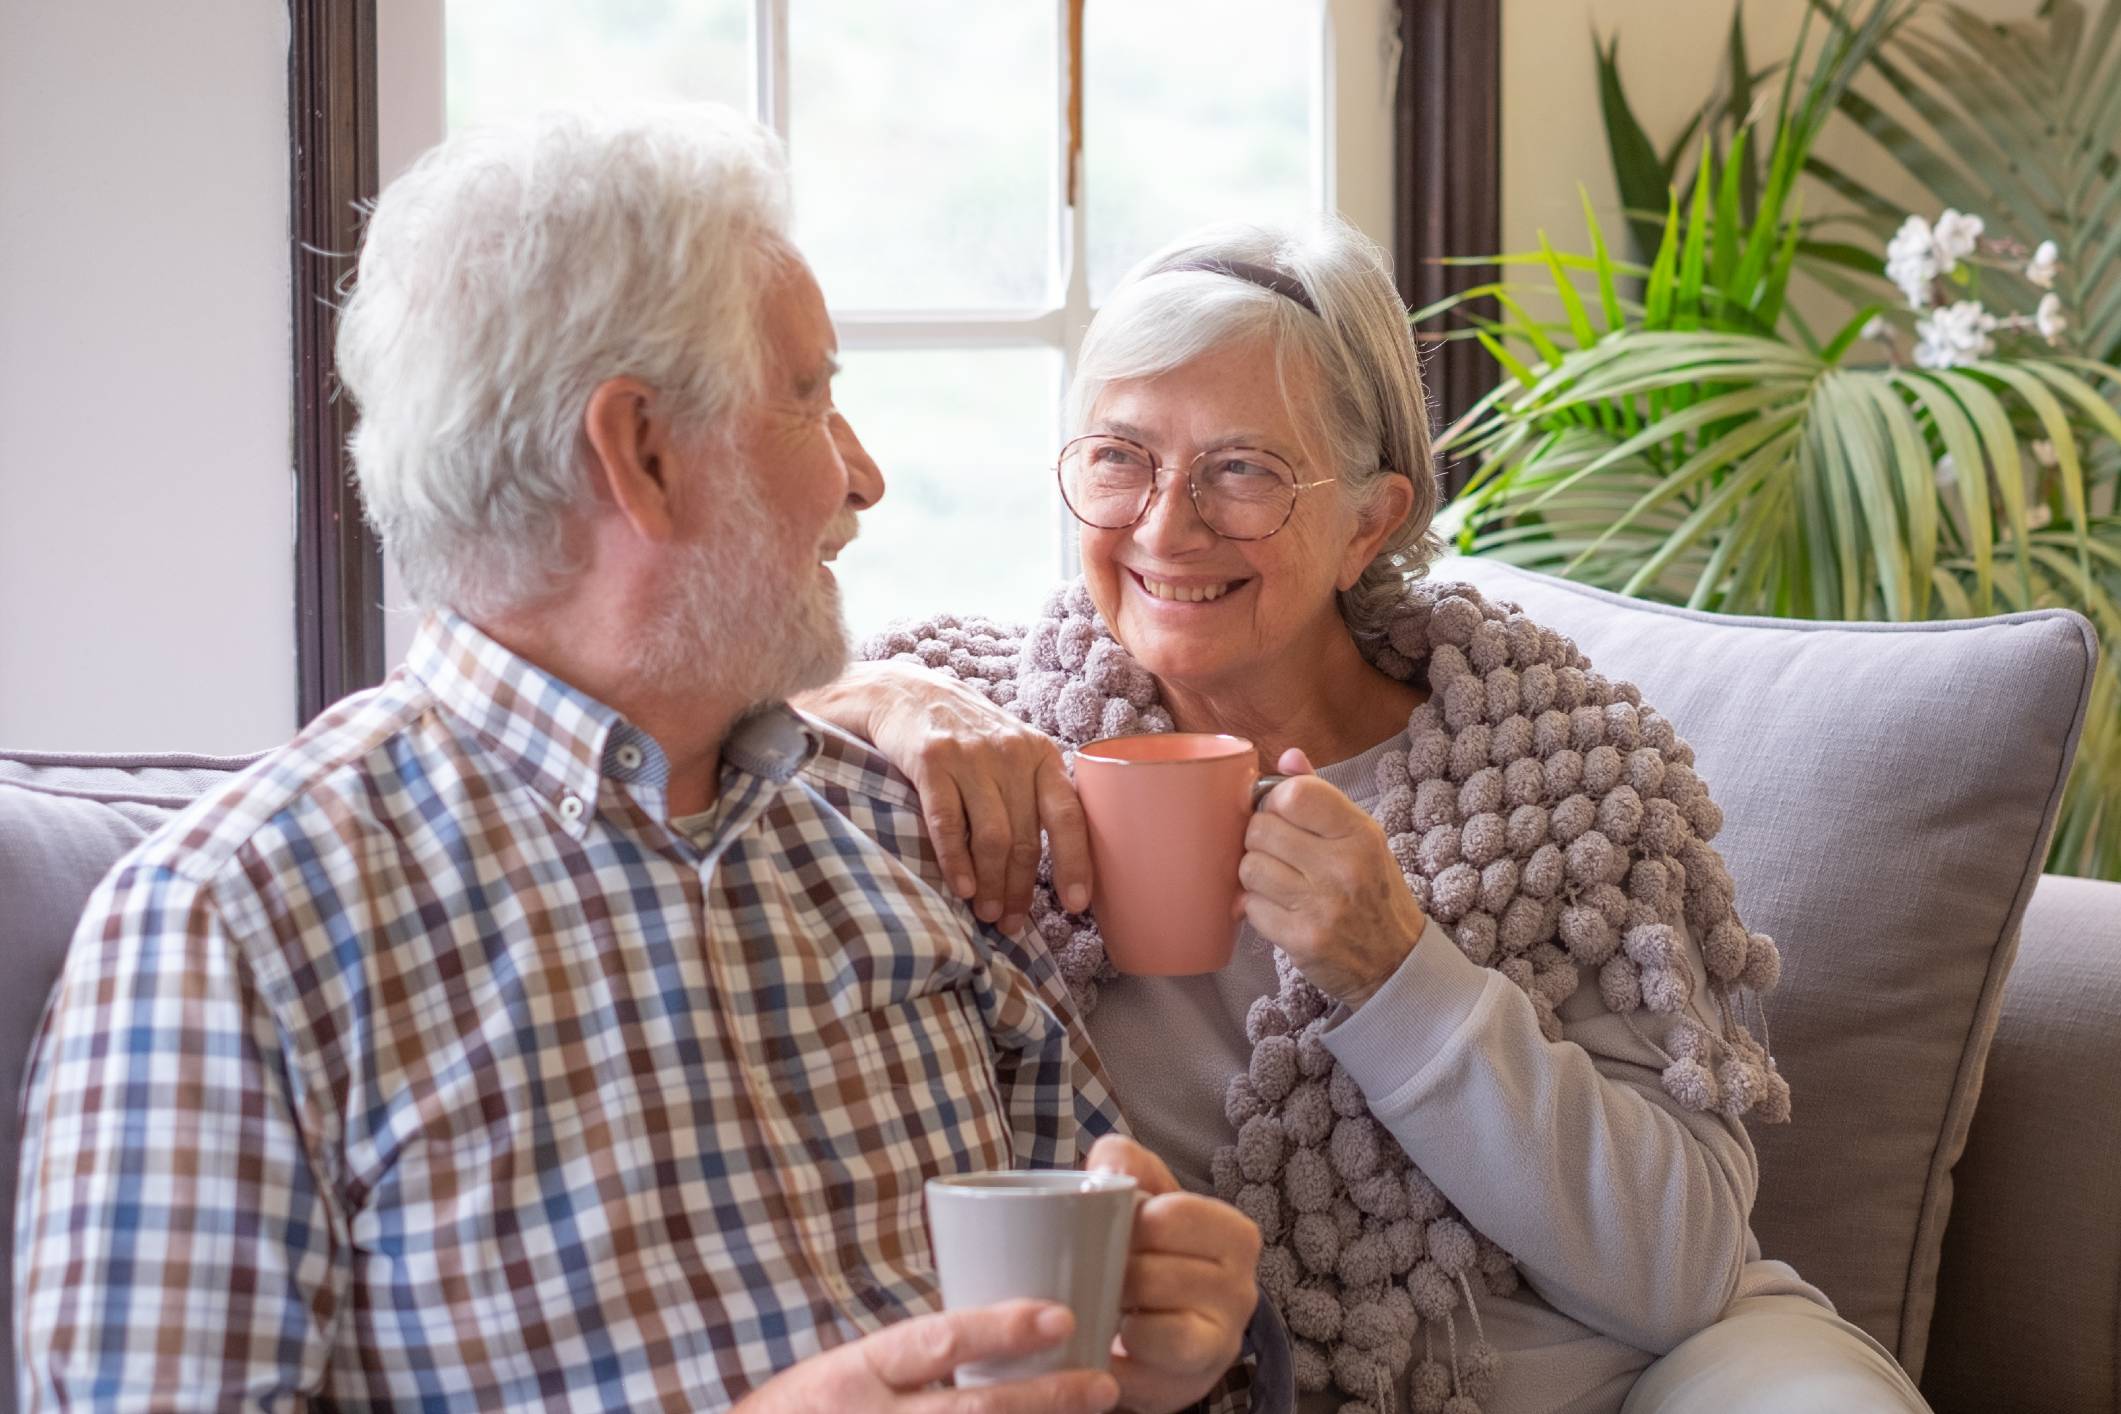 Barriers prevent aged care residents from enjoying intimacy